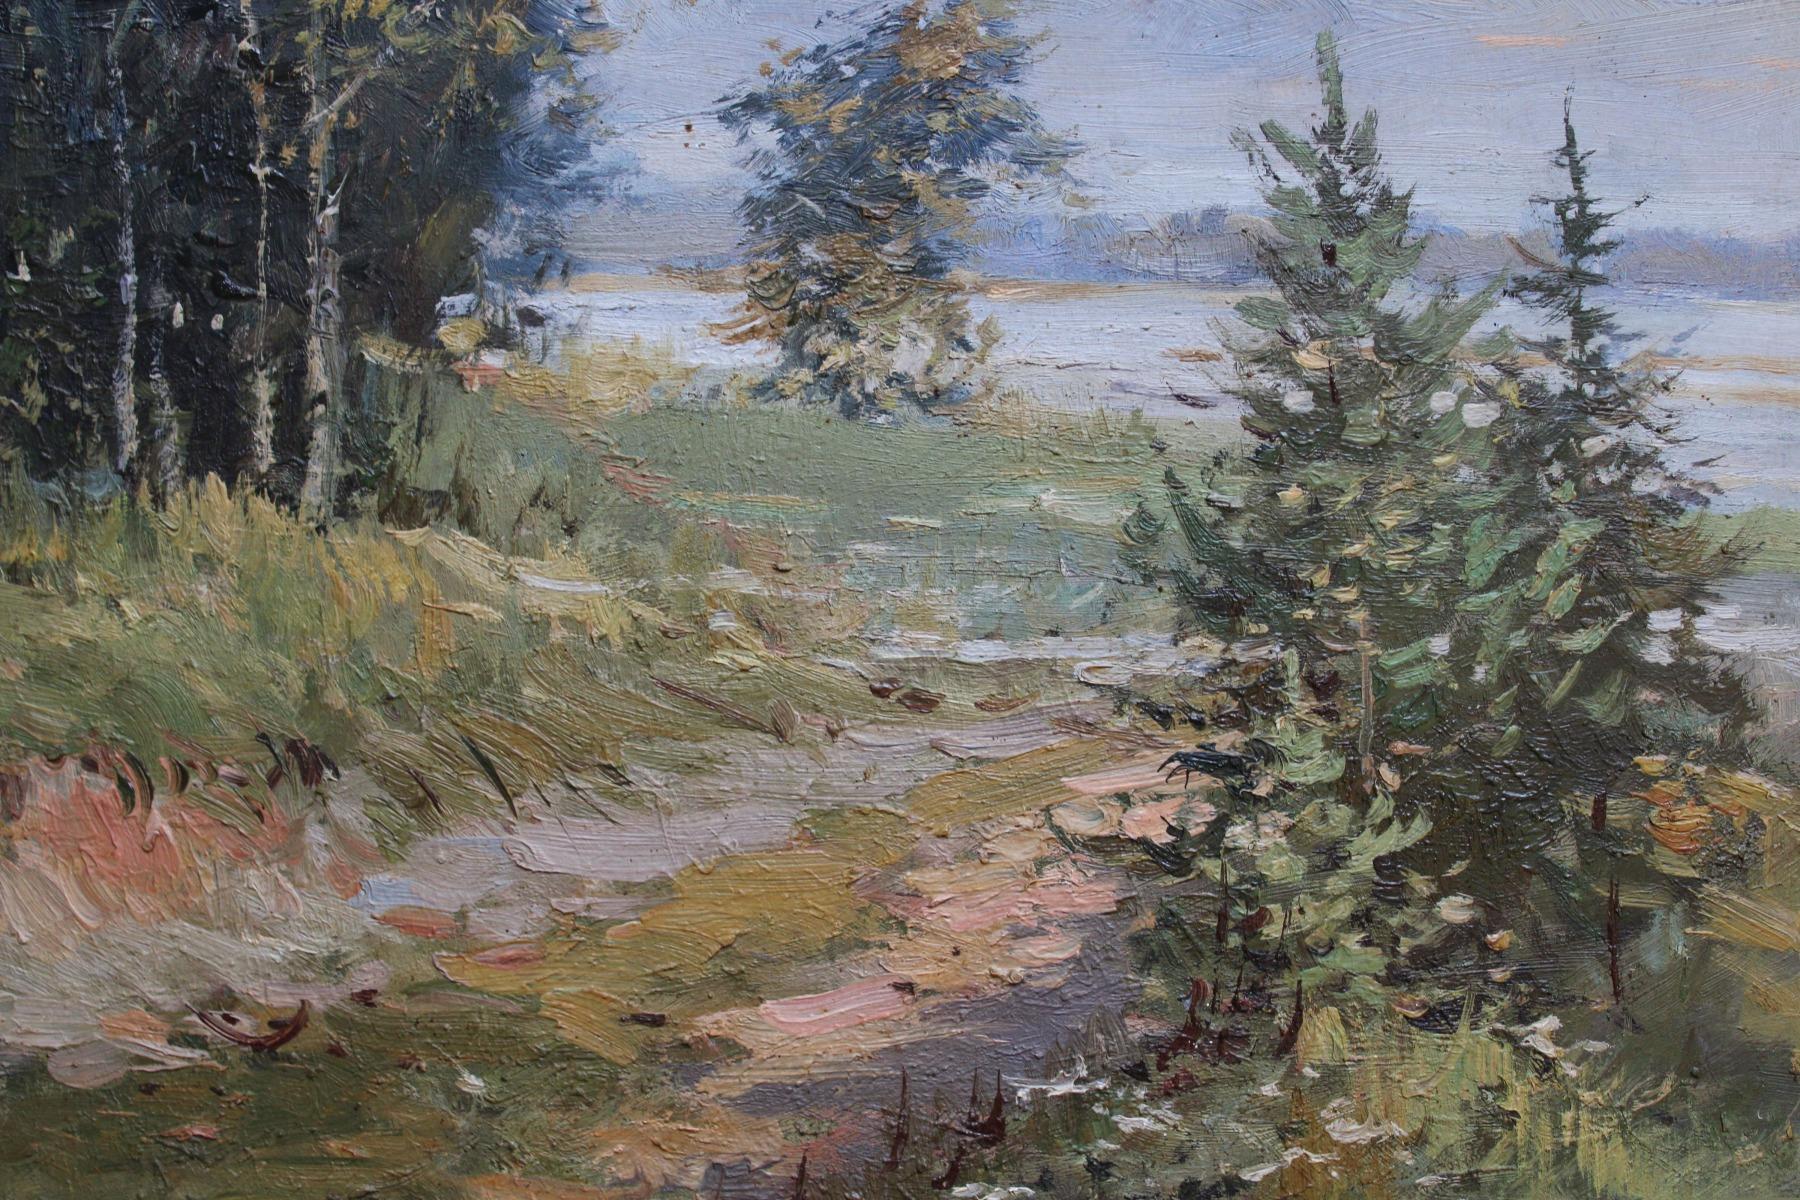 The road to the lake. 1970, cardboard, oil, 46x60 cm

